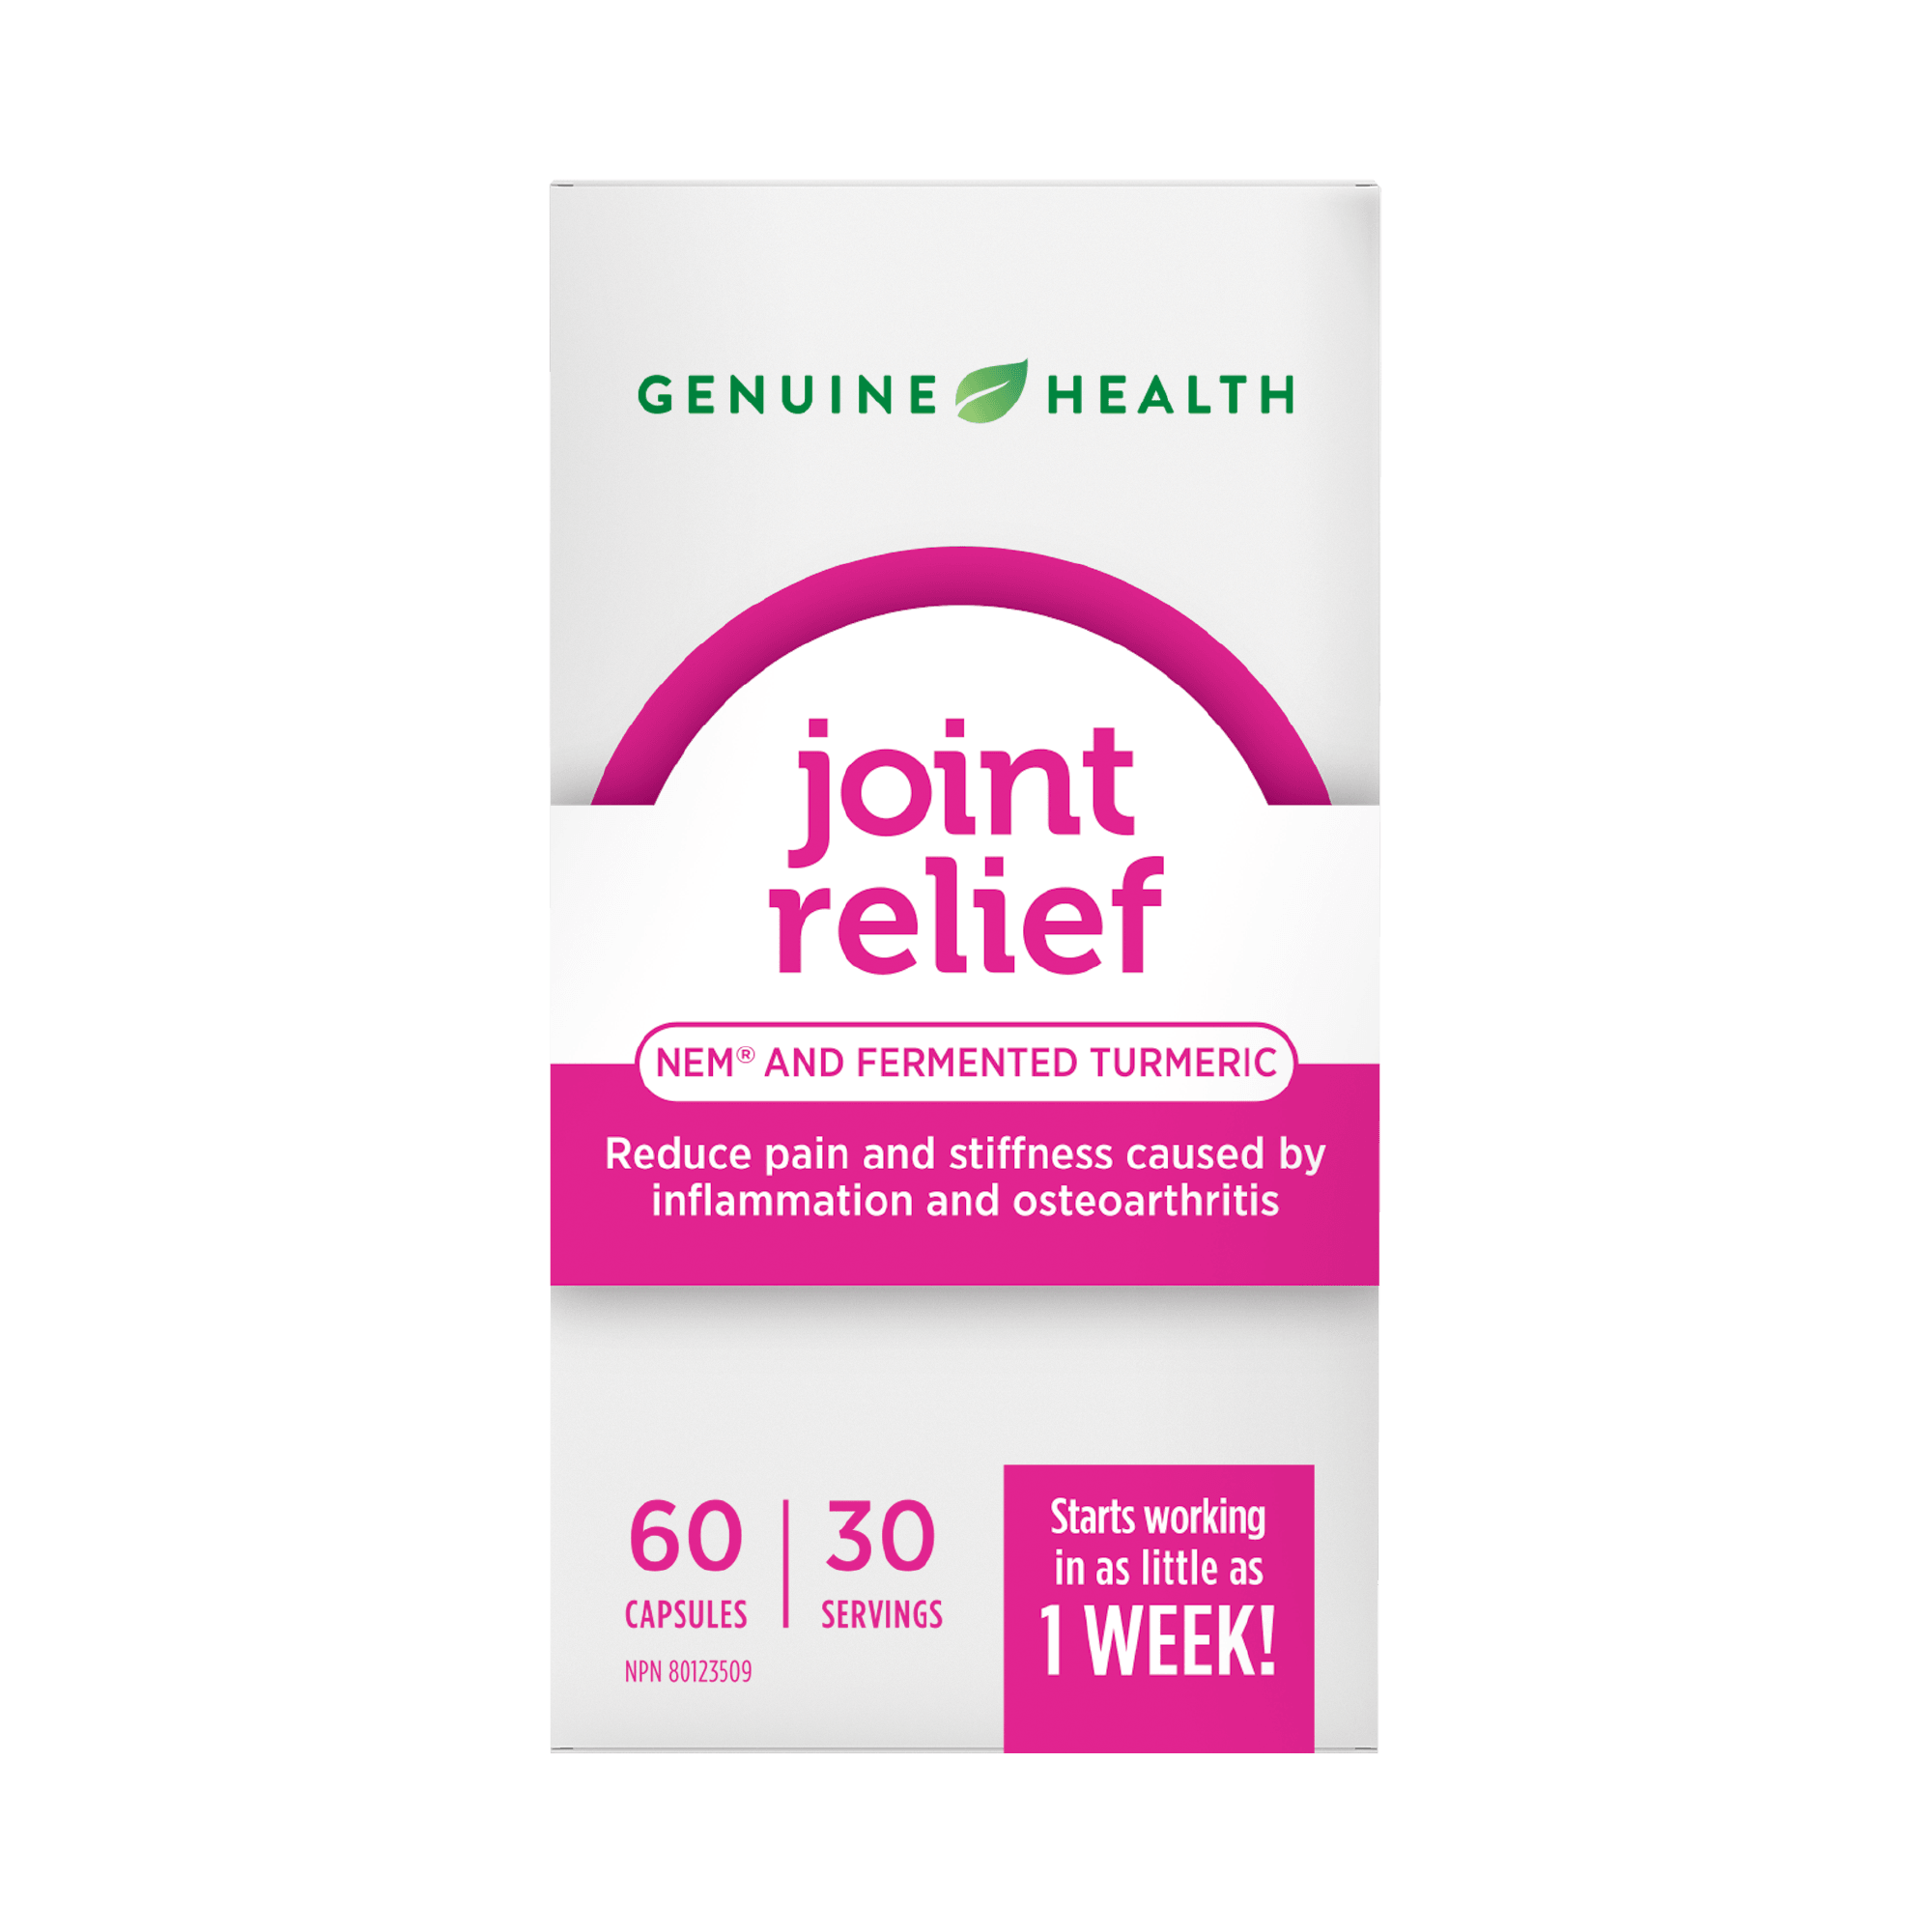 Genuine Health Joint Relief 60 Capsules - Fast and Effective Relief From Joint Pain and Inflammation With Fermented Turmeric,